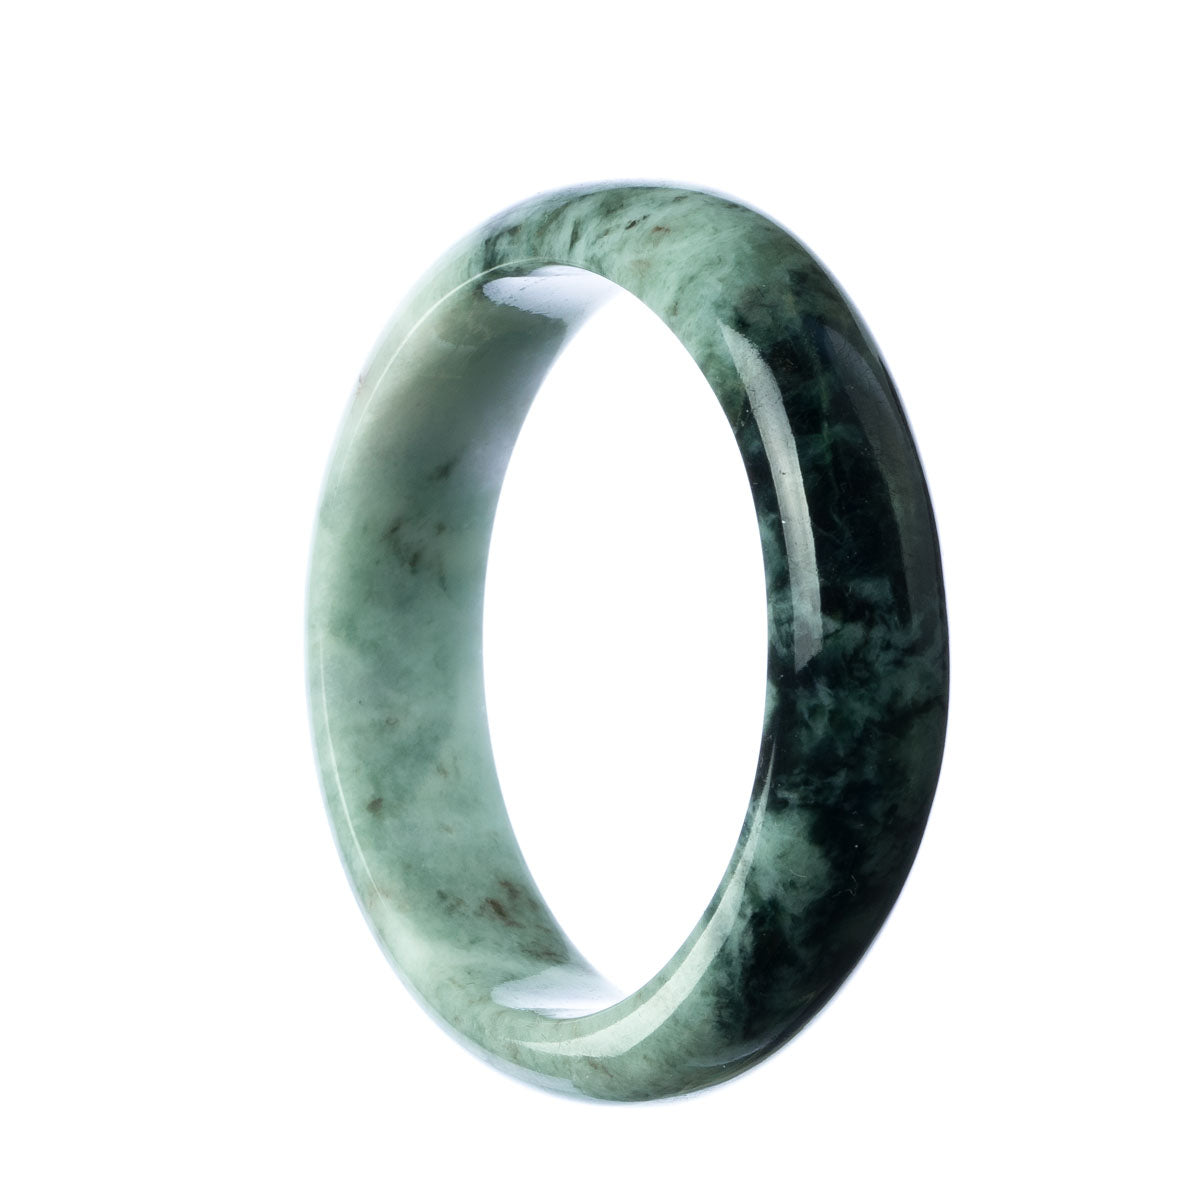 A beautiful half moon-shaped green jadeite bangle, carefully crafted from genuine Grade A jade. The bangle has a diameter of 59mm and is a stunning addition to any jewelry collection.